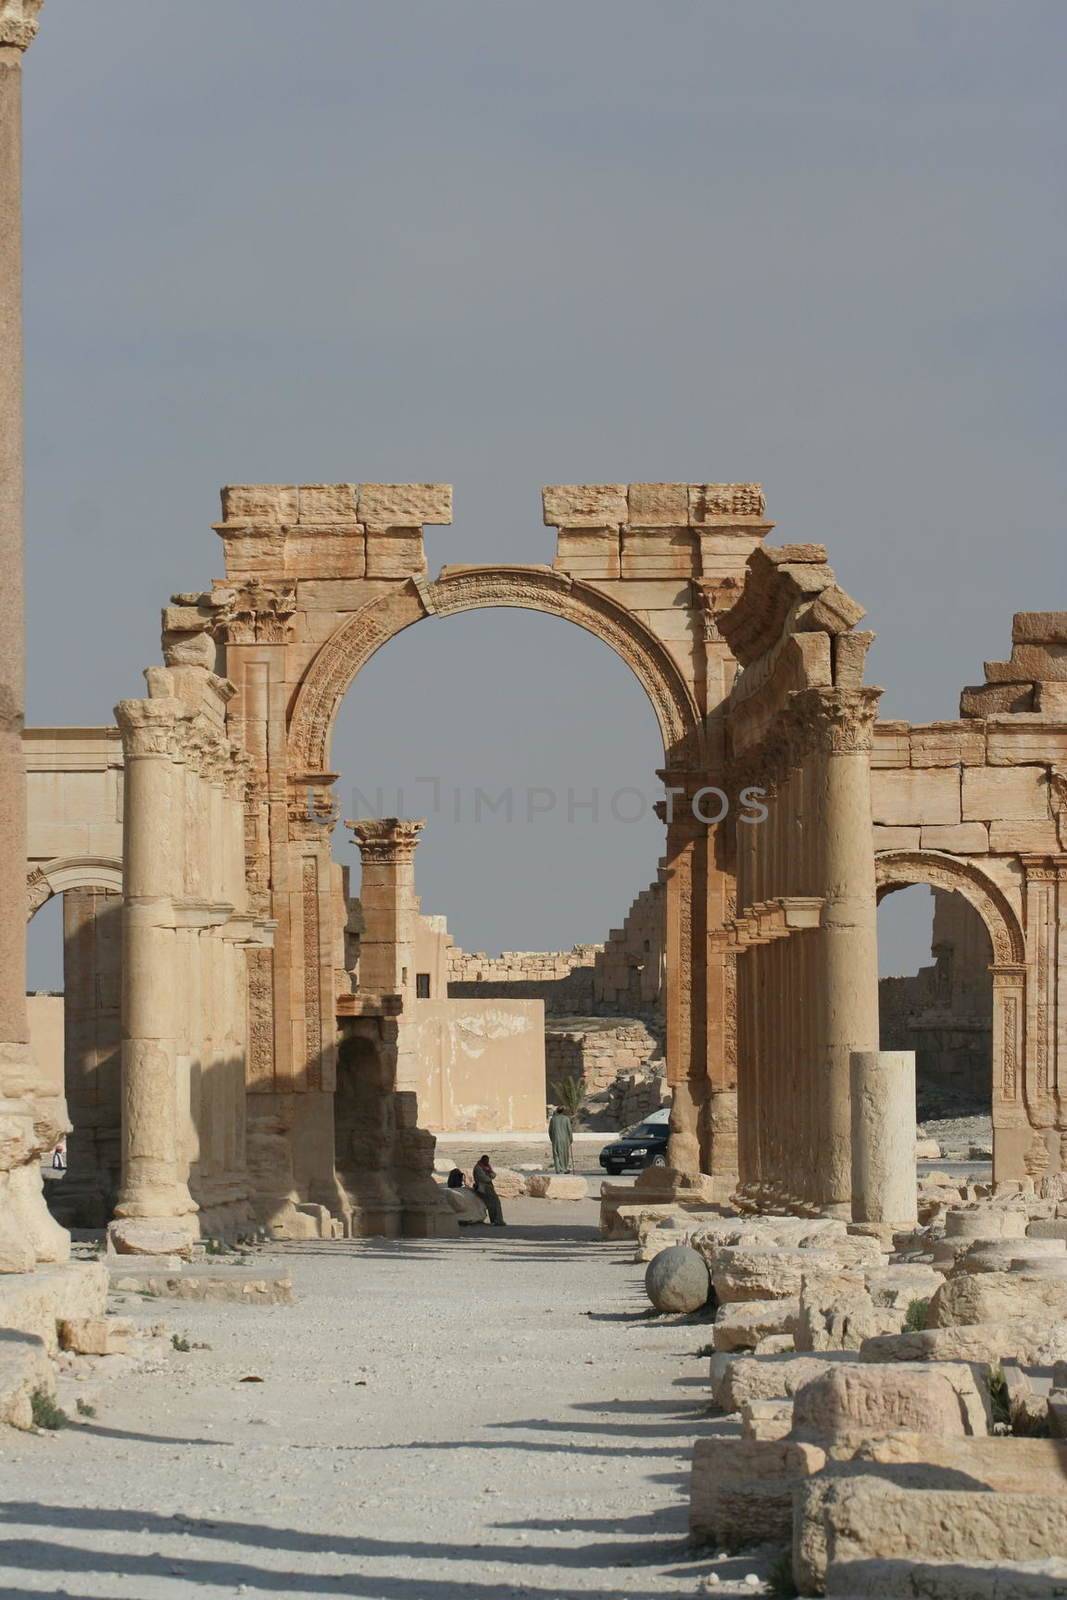 SYRIA, Palmyra : A picture shows ruins of the antique city of Palmyra located on an oasis in central Syria on April 13, 2010. Syria's antiquities chief hailed the imminent recapture of the ancient city of Palmyra from the IS group and vowed to rebuild the famed monuments the jihadists have destroyed, on March 24, 2016.